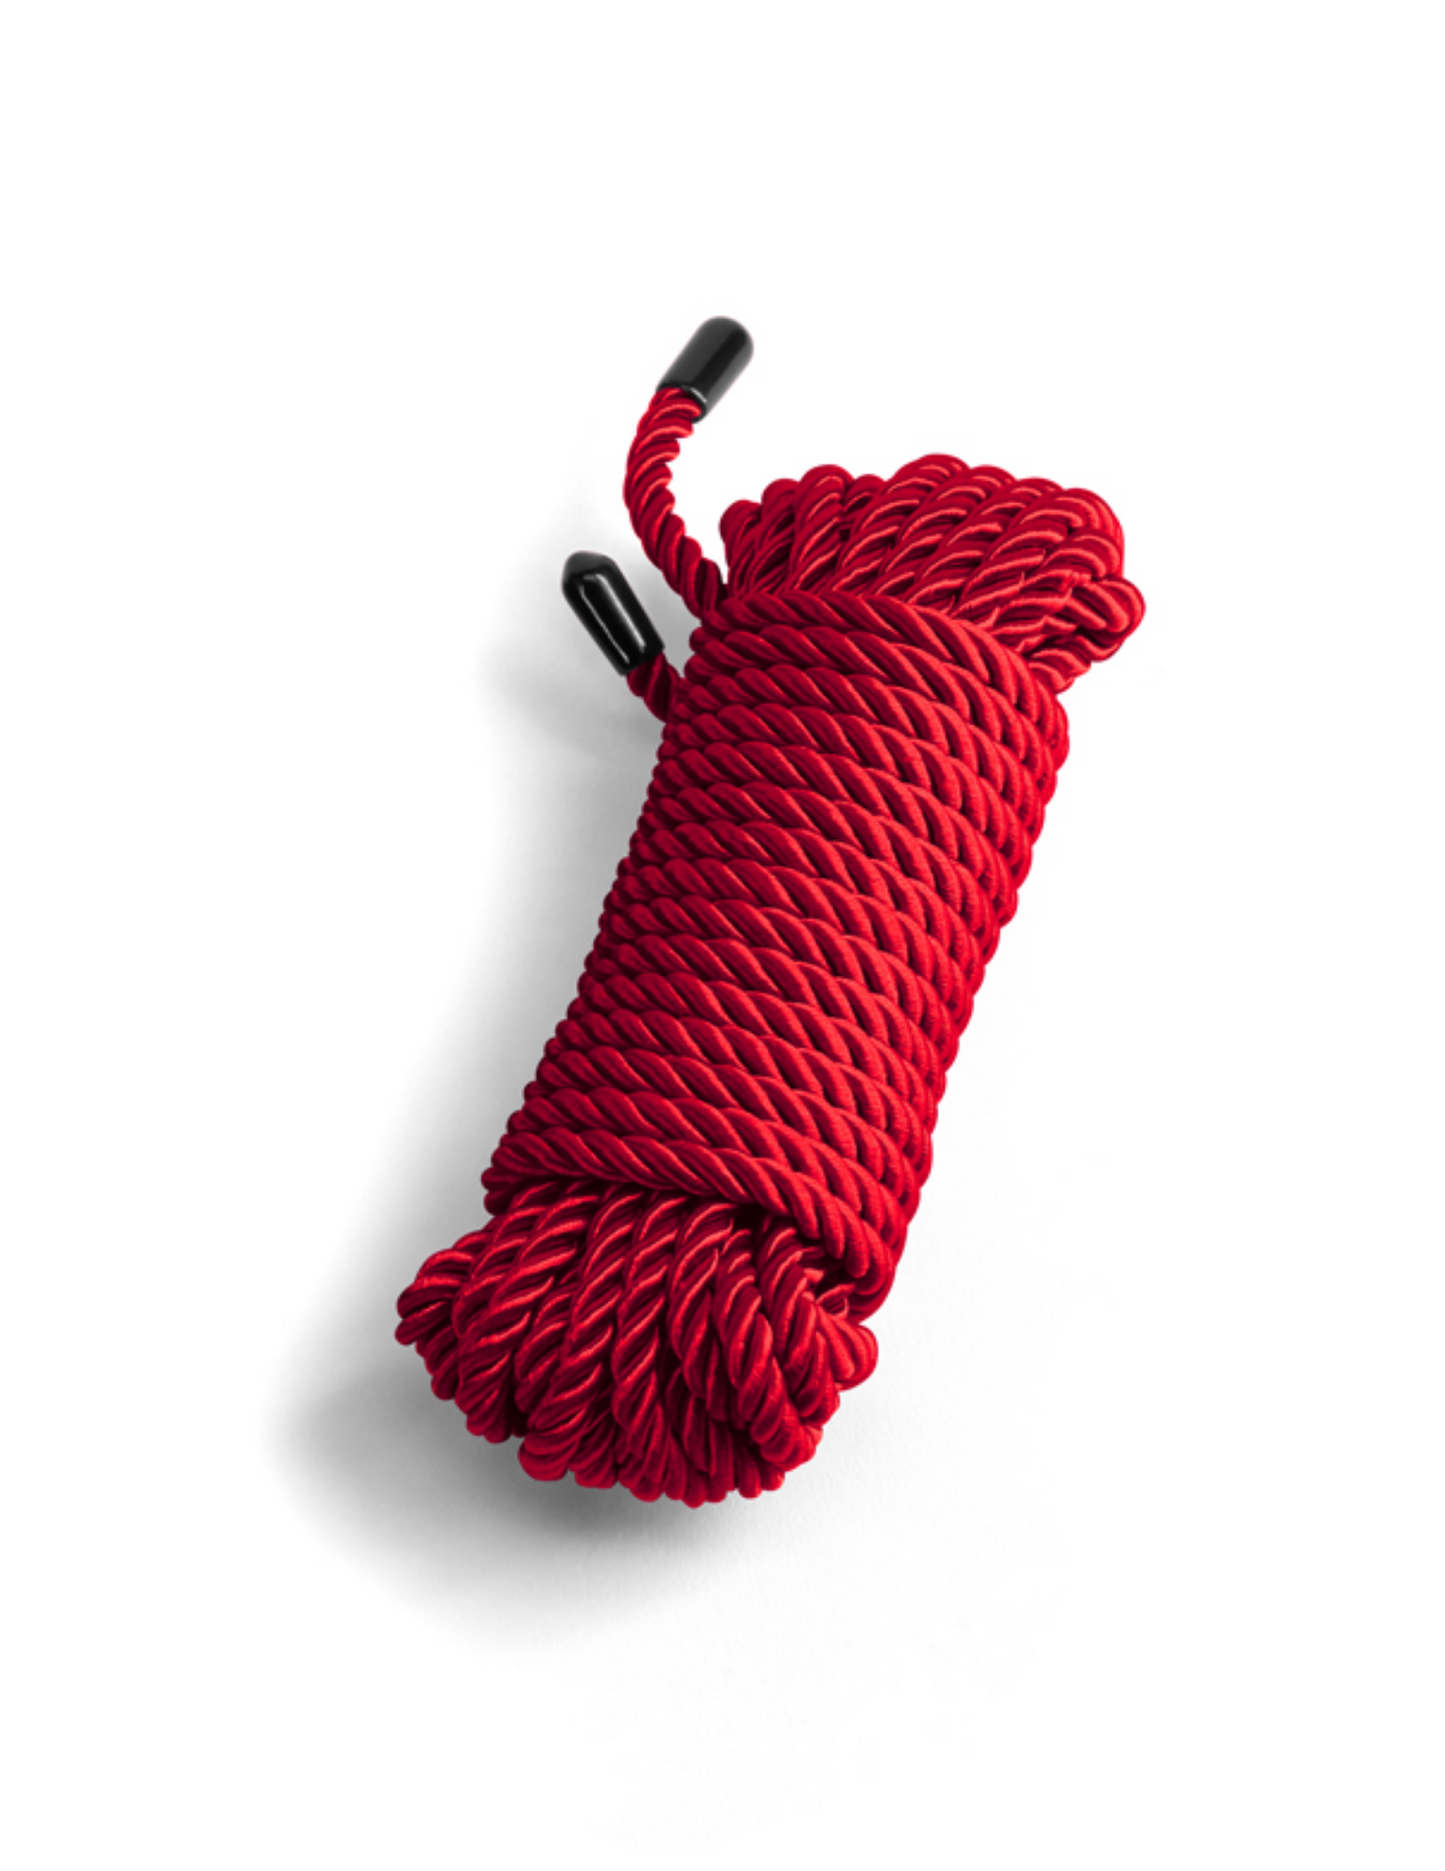 Close-up of the bundle of Bound Rope from NS Novelties (red) shows its soft texture and finished ends.